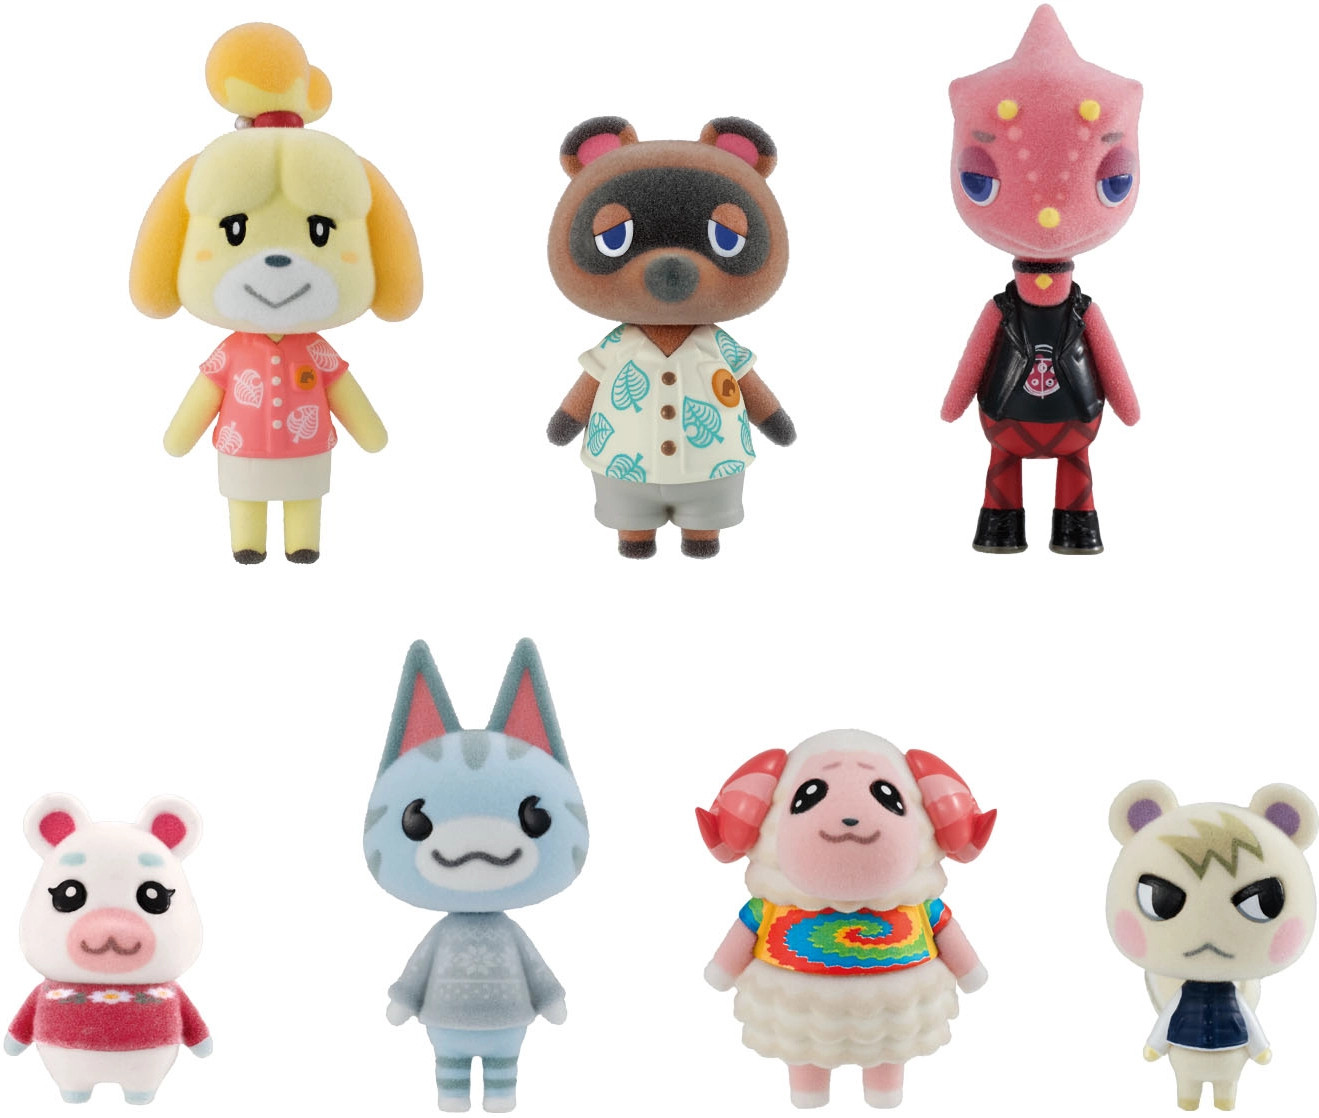 Animal Crossing New Horizons - Villager Flocked Doll Collection